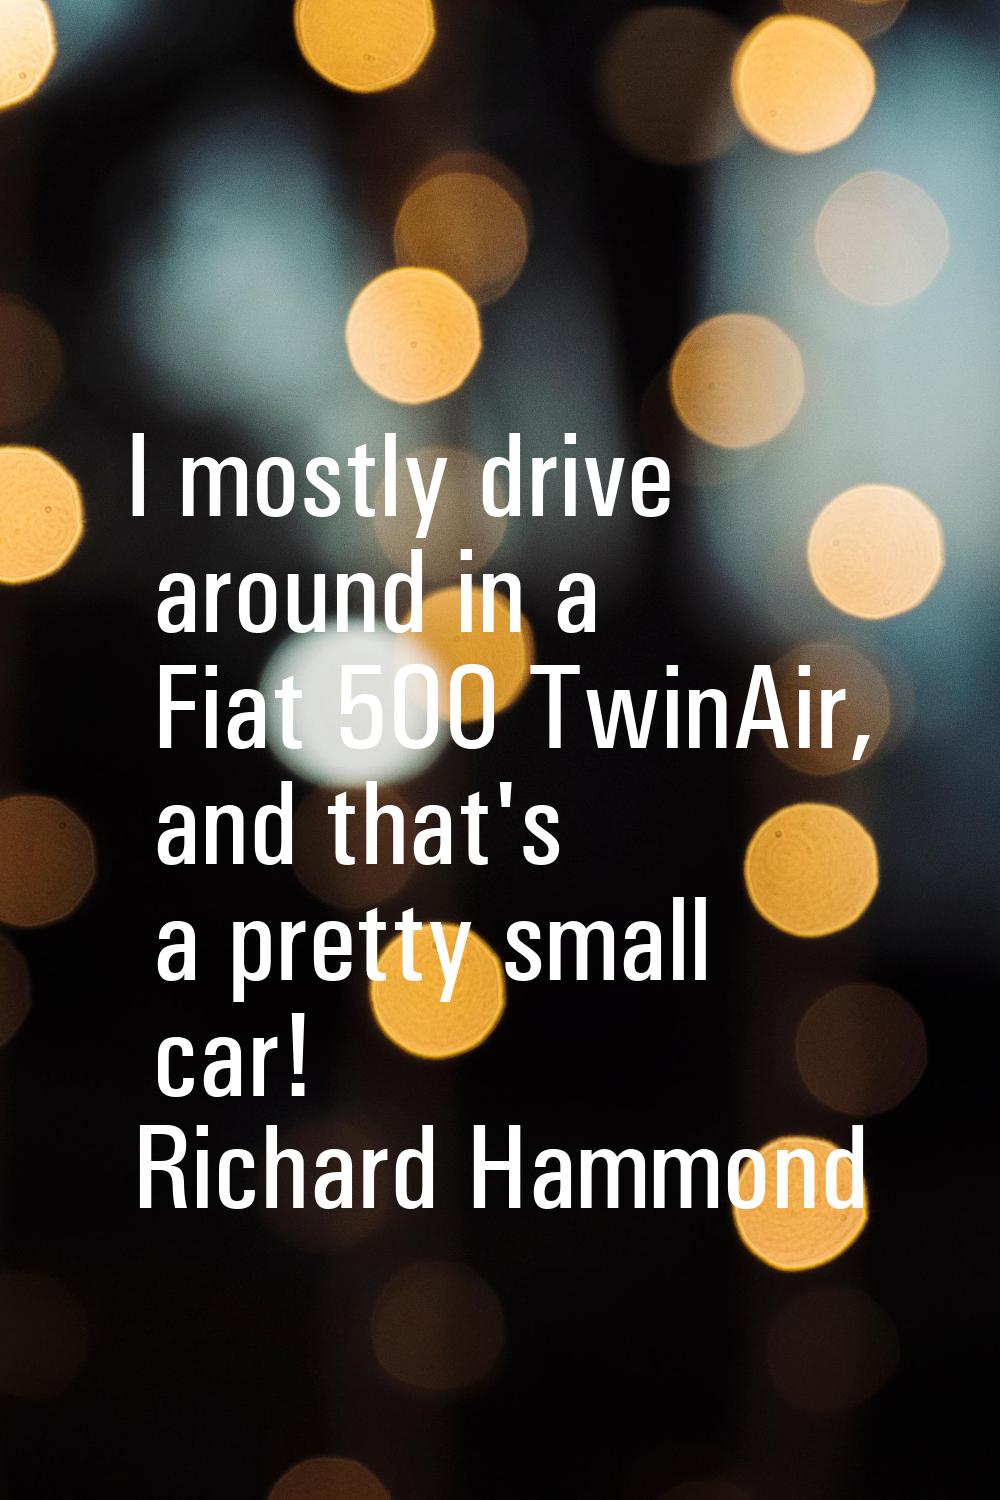 I mostly drive around in a Fiat 500 TwinAir, and that's a pretty small car!